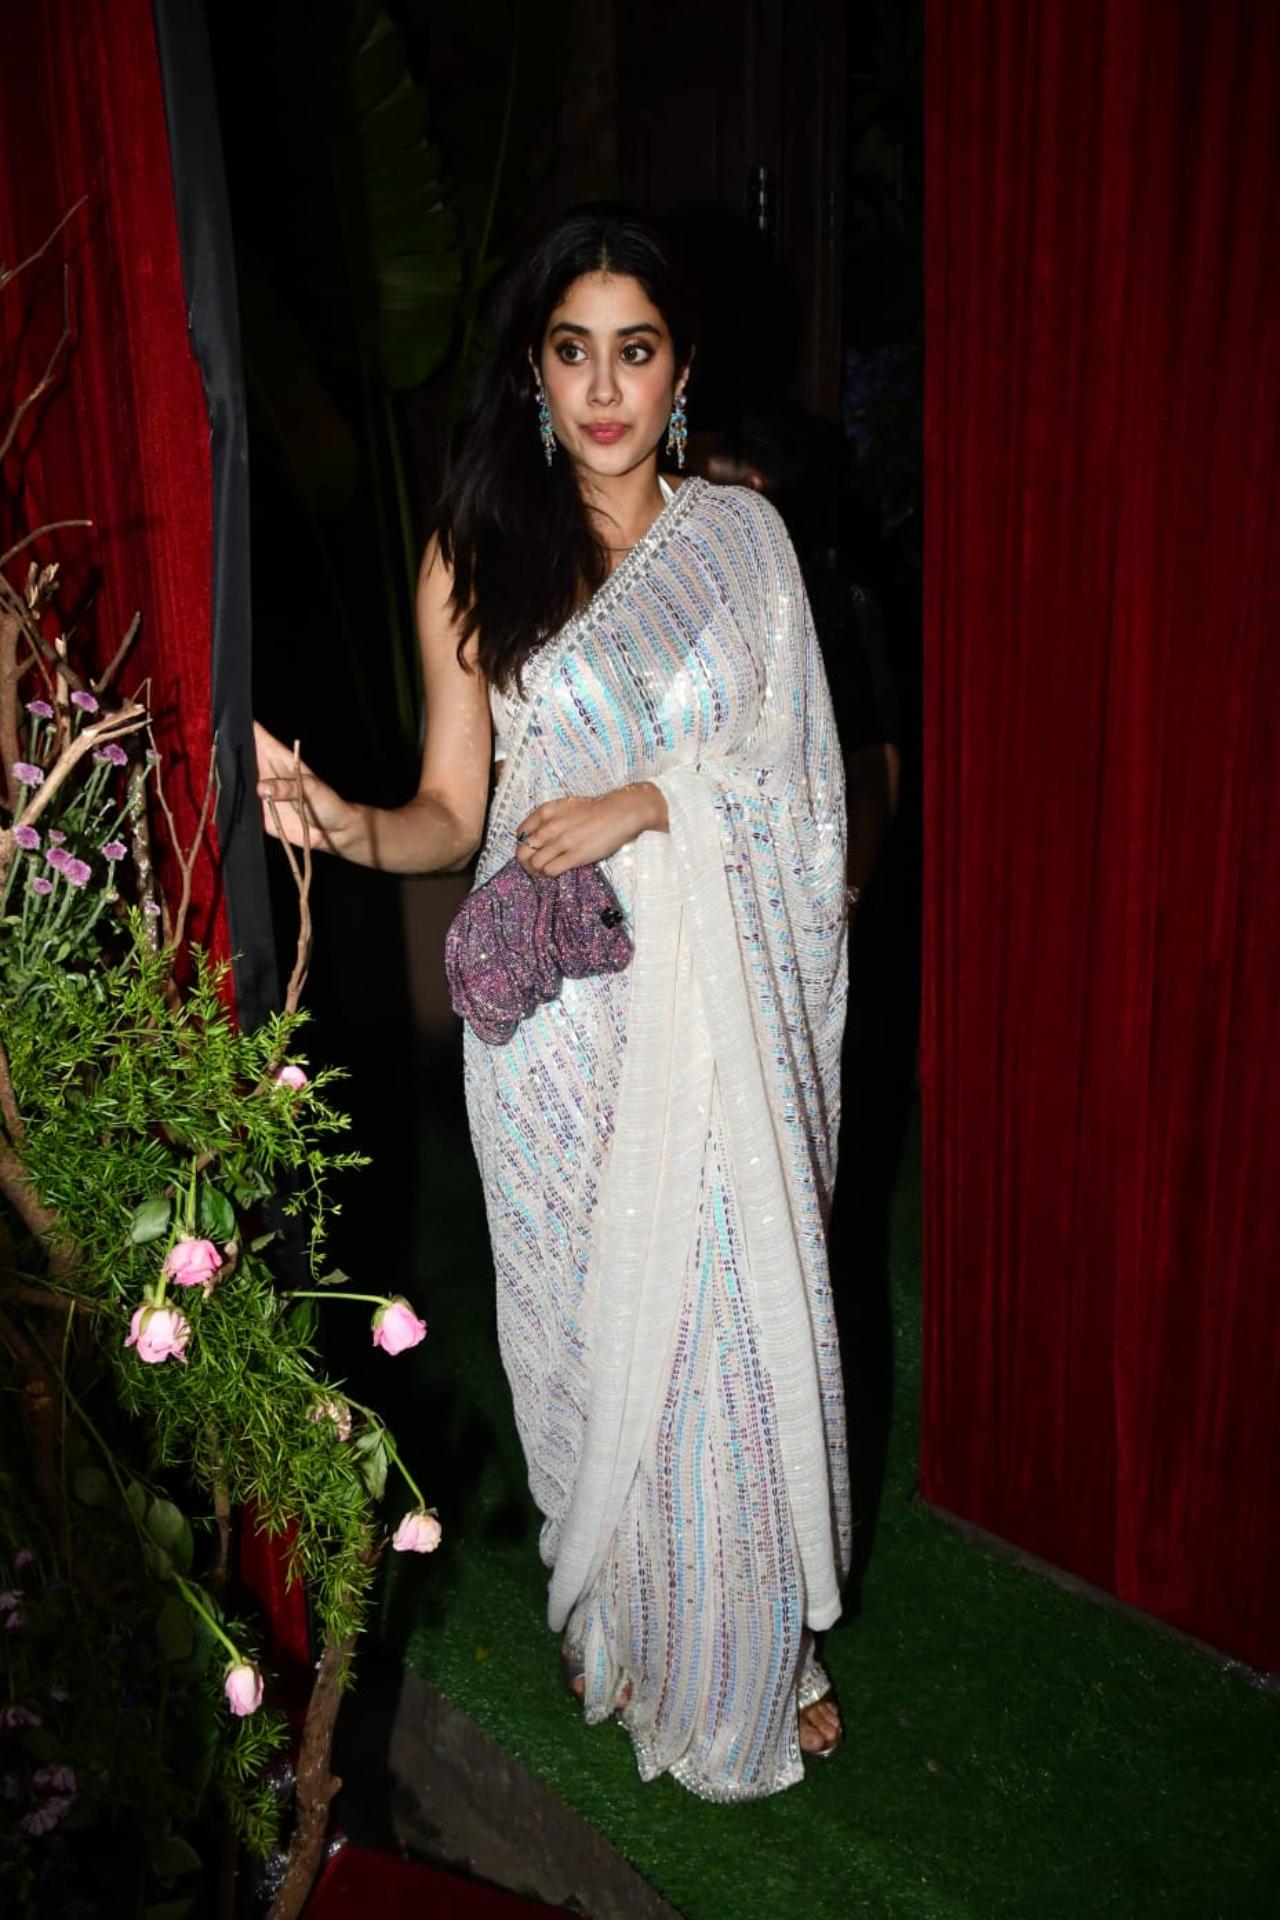 Janhvi Kapoor looked gorgeous as ever in a shimmery white saree with a backless blouse